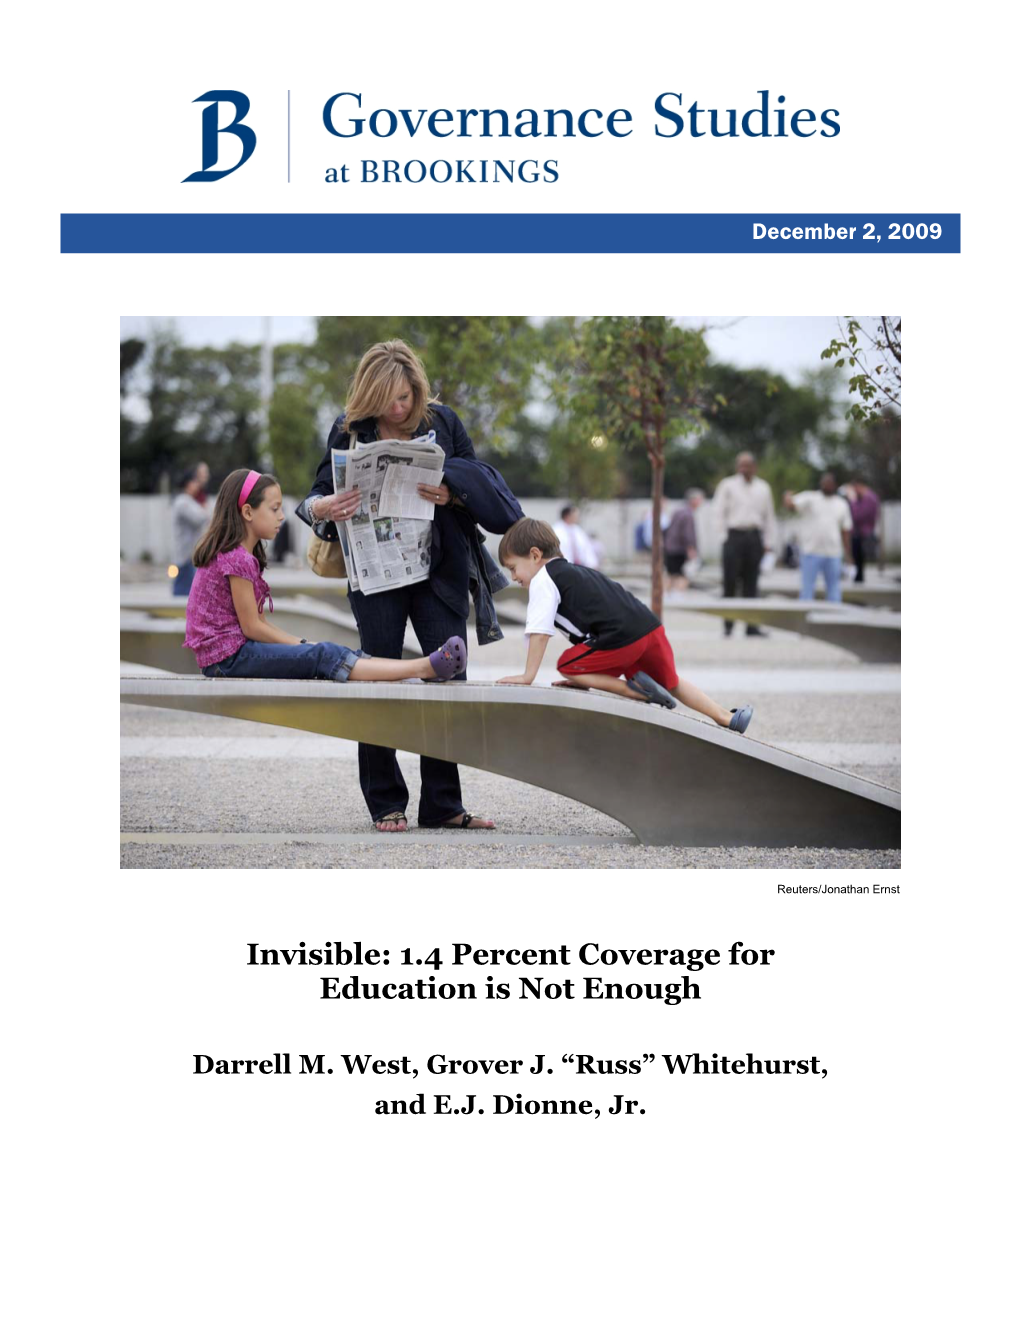 1.4 Percent Coverage for Education Is Not Enough